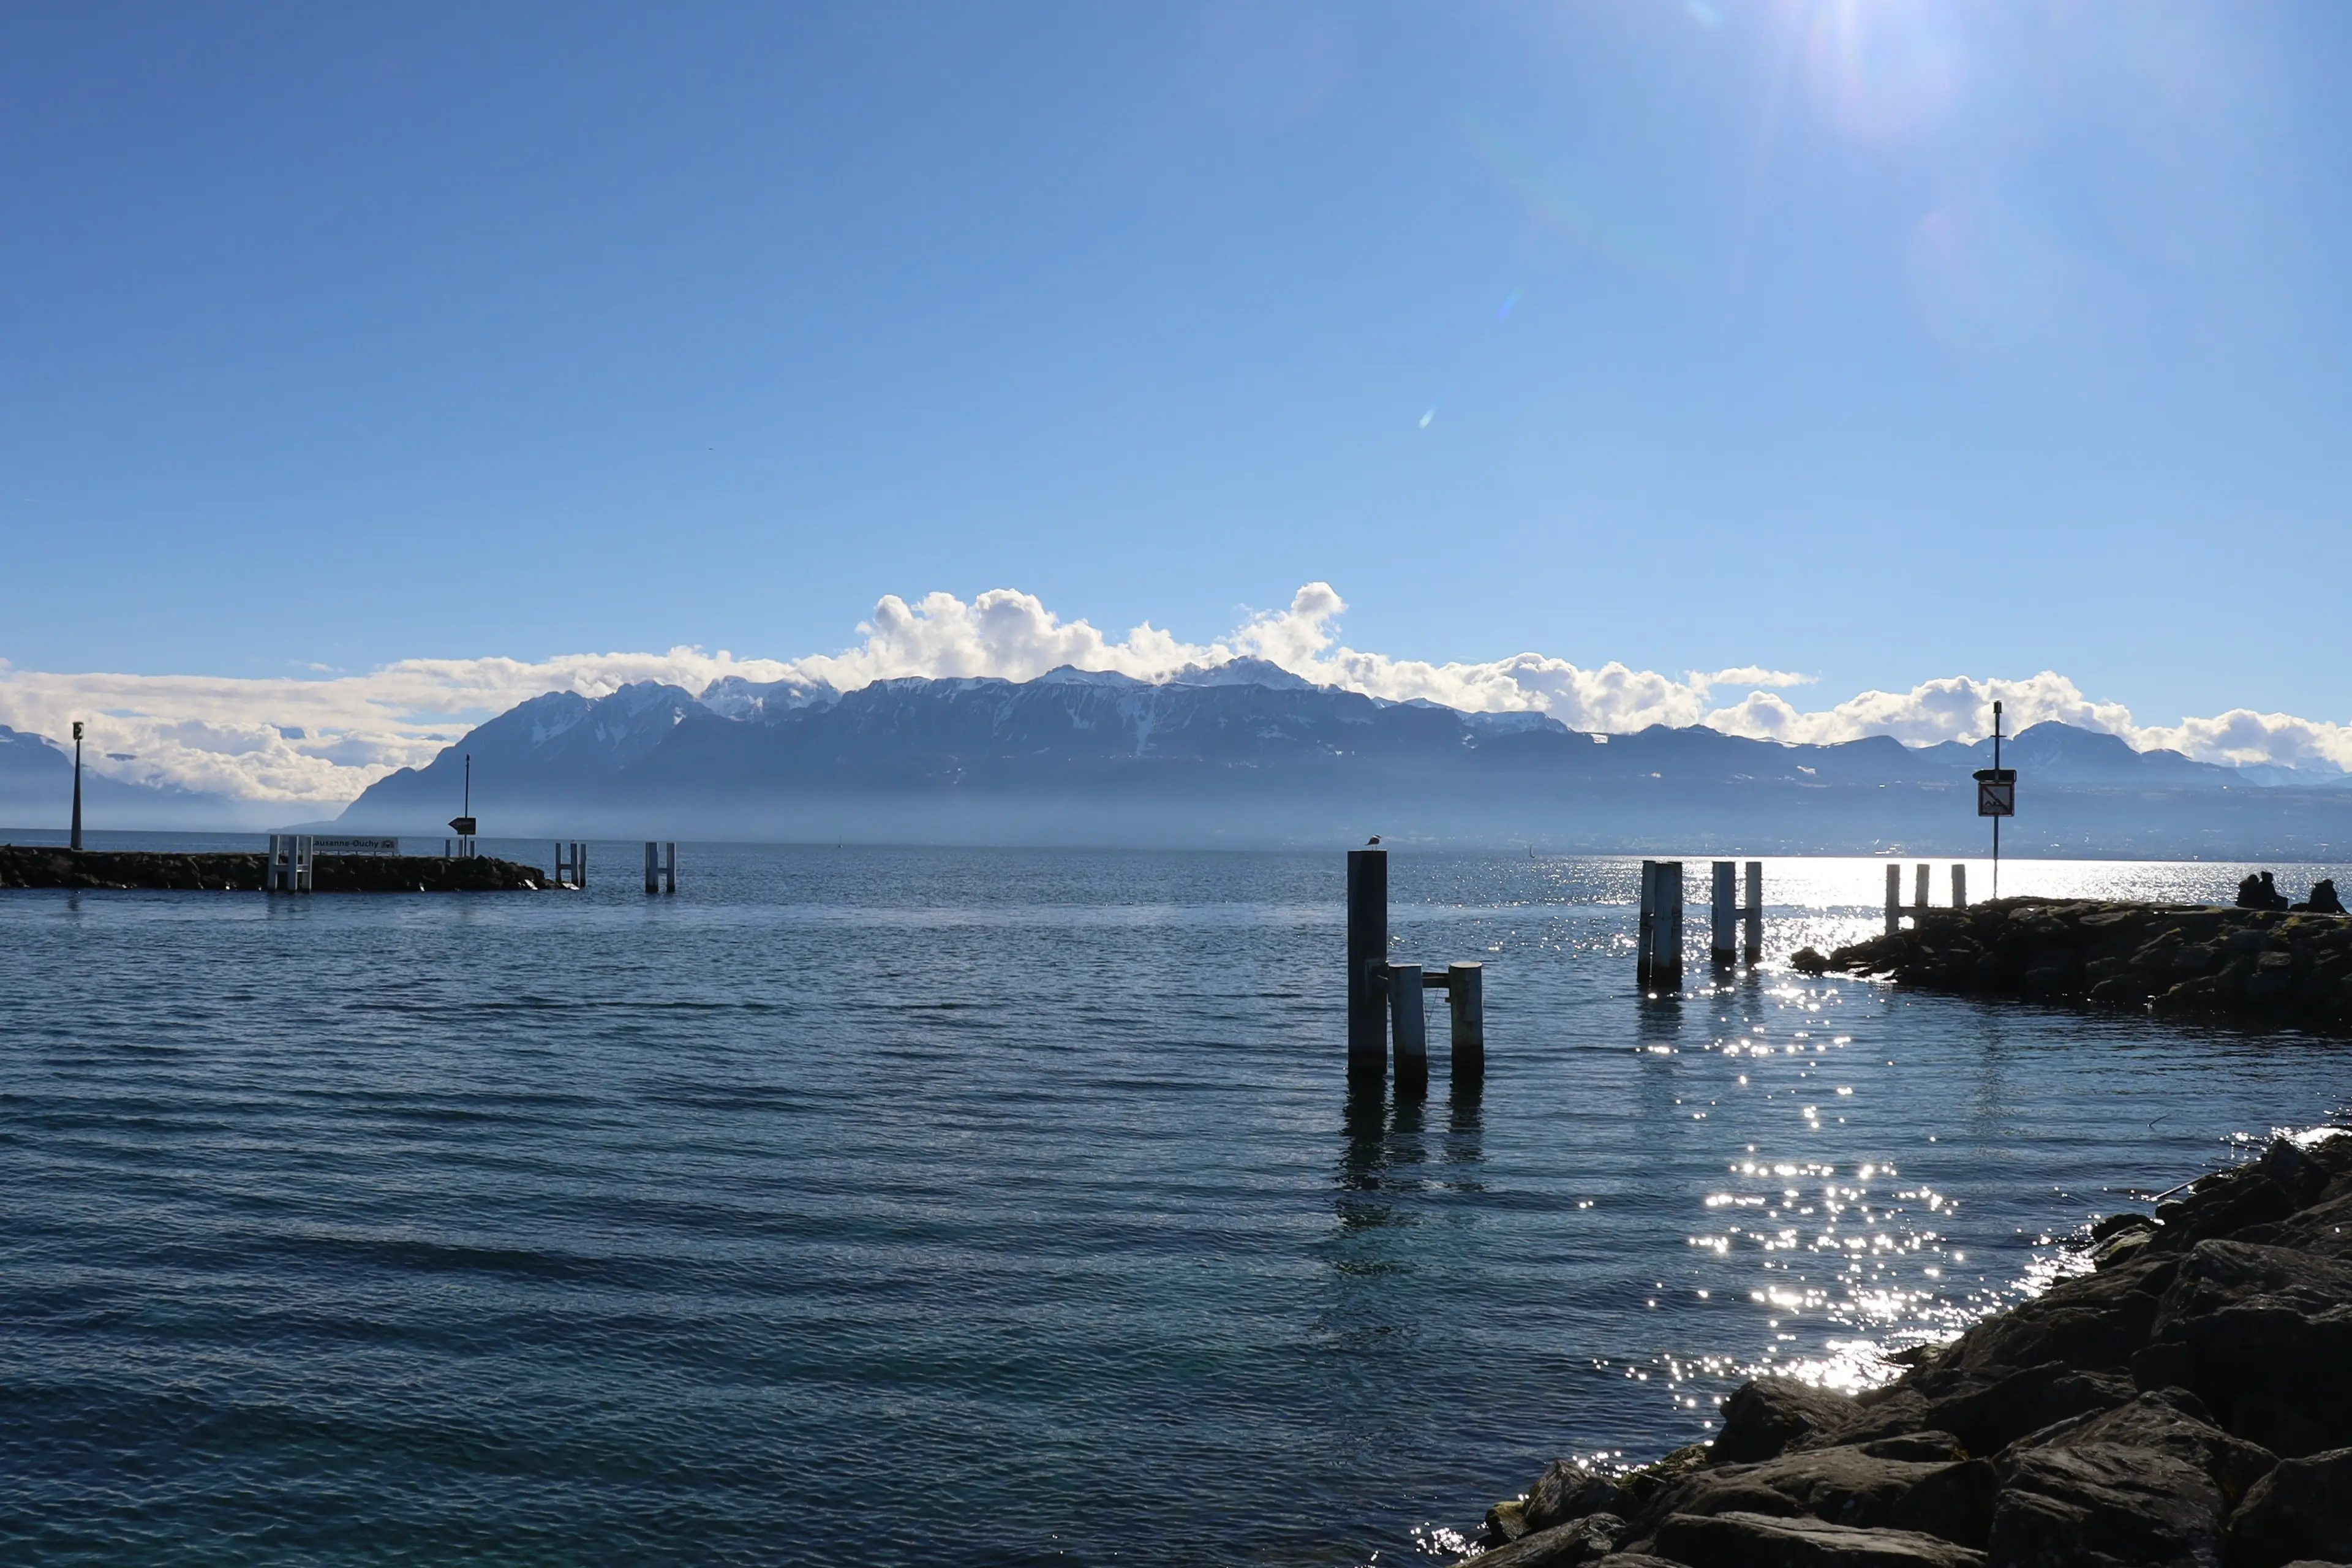 Lake Geneva seen from the port of Ouchy